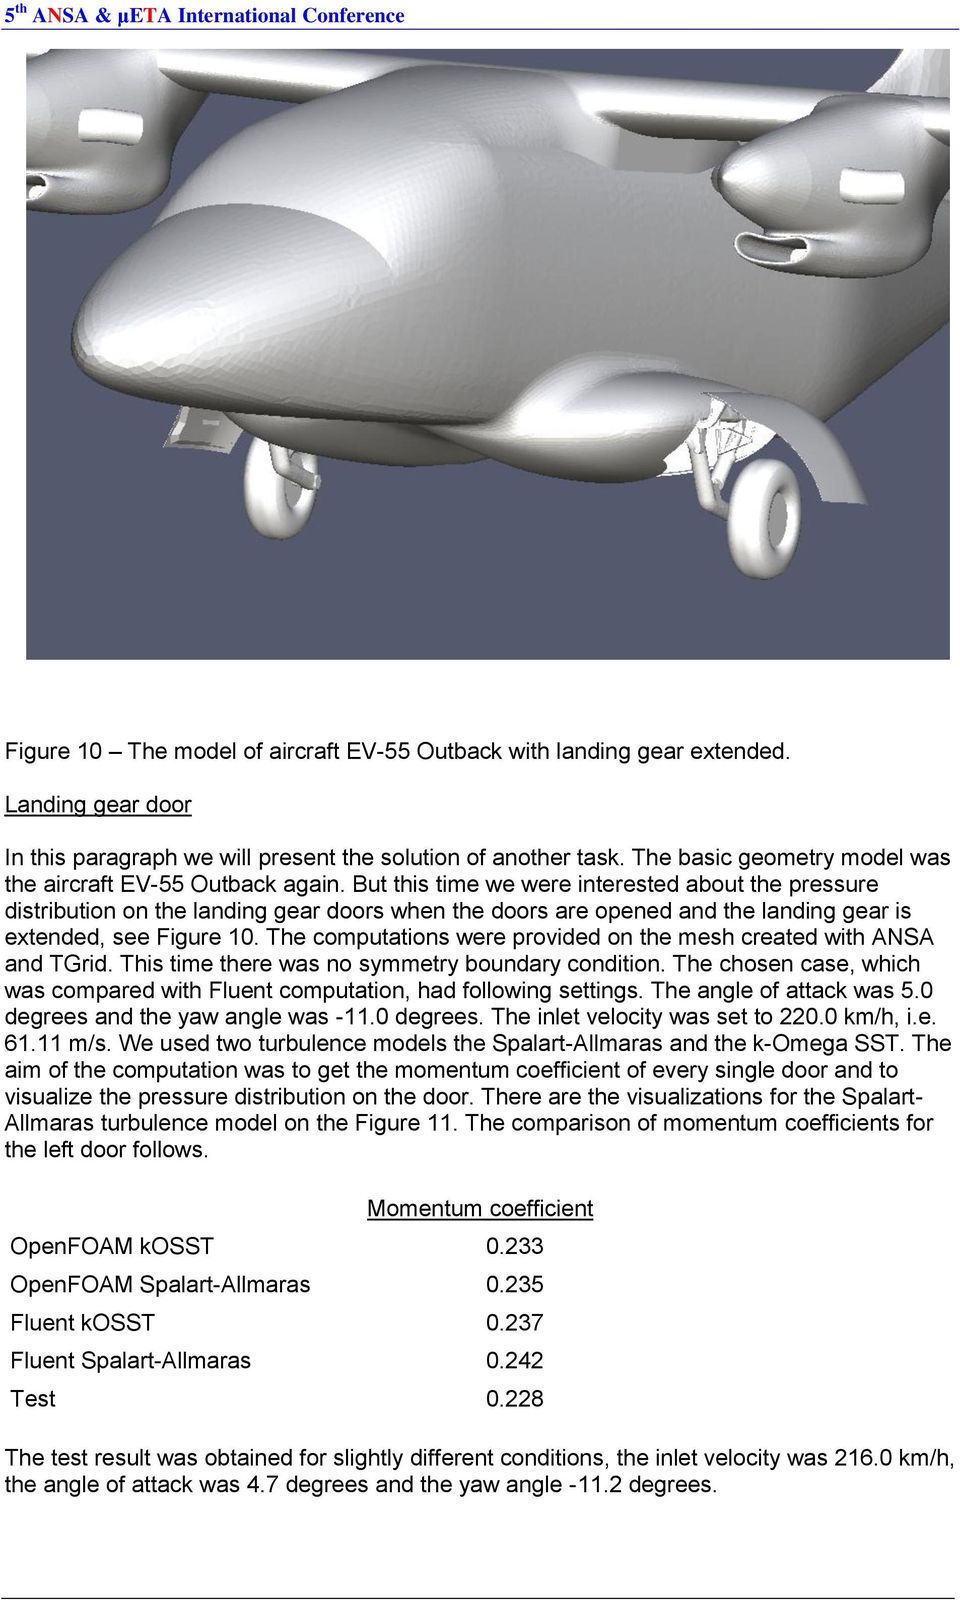 But this time we were interested about the pressure distribution on the landing gear doors when the doors are opened and the landing gear is extended, see Figure 10.